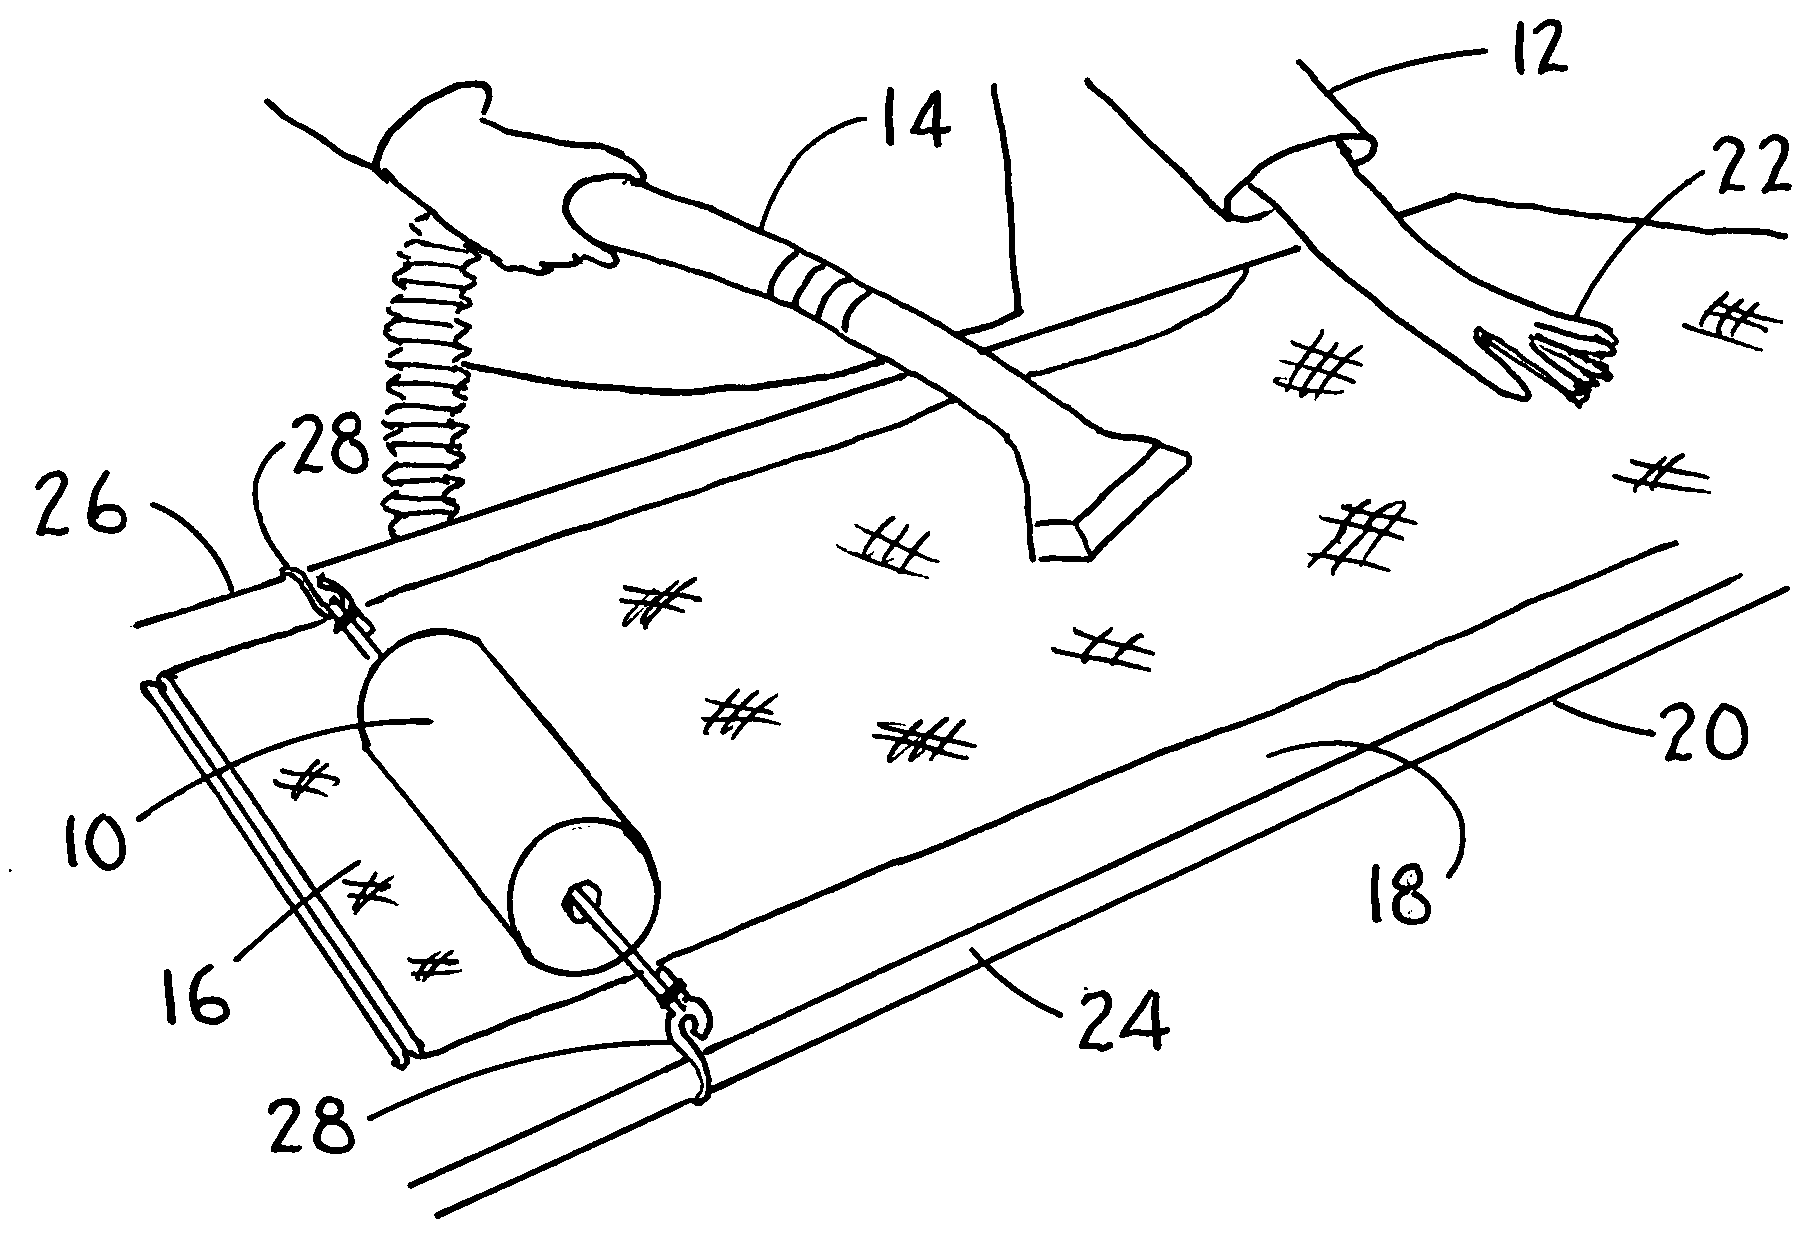 Apparatus and method for releasably holding fabric in place on an ironing board or the like